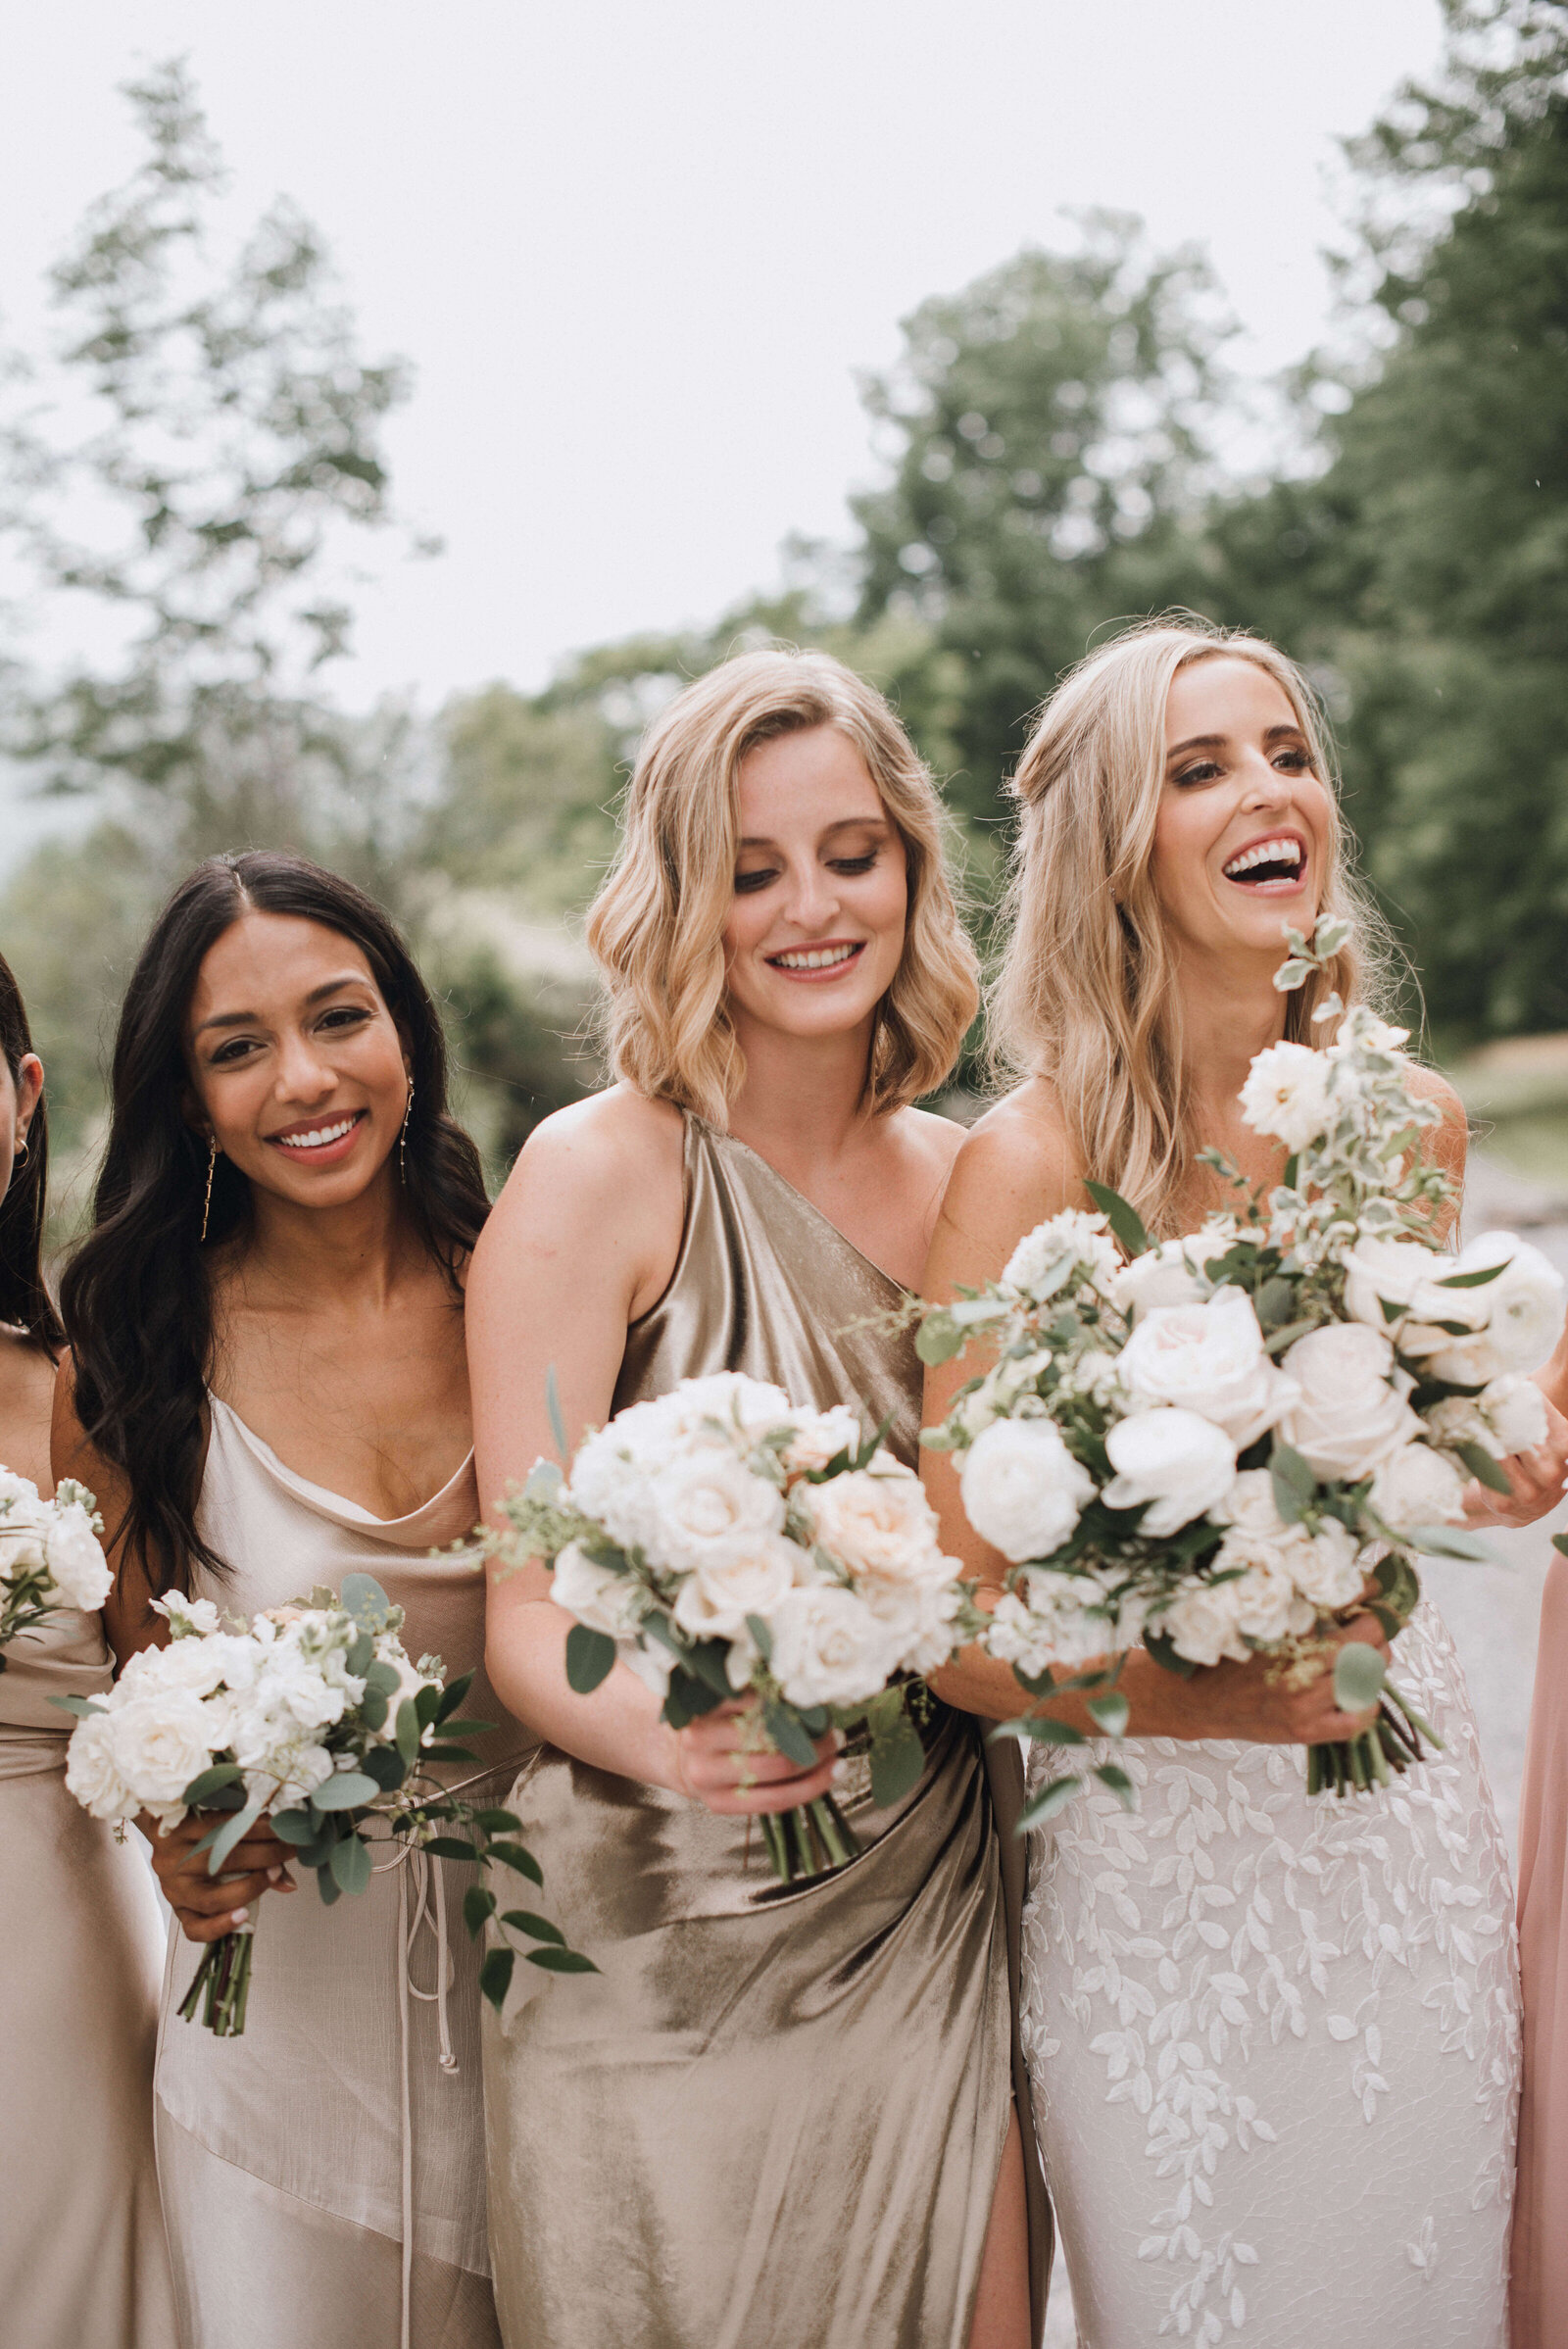 A bride and her bridessmaids in shapes of ivory and champagne are holding white bouquets